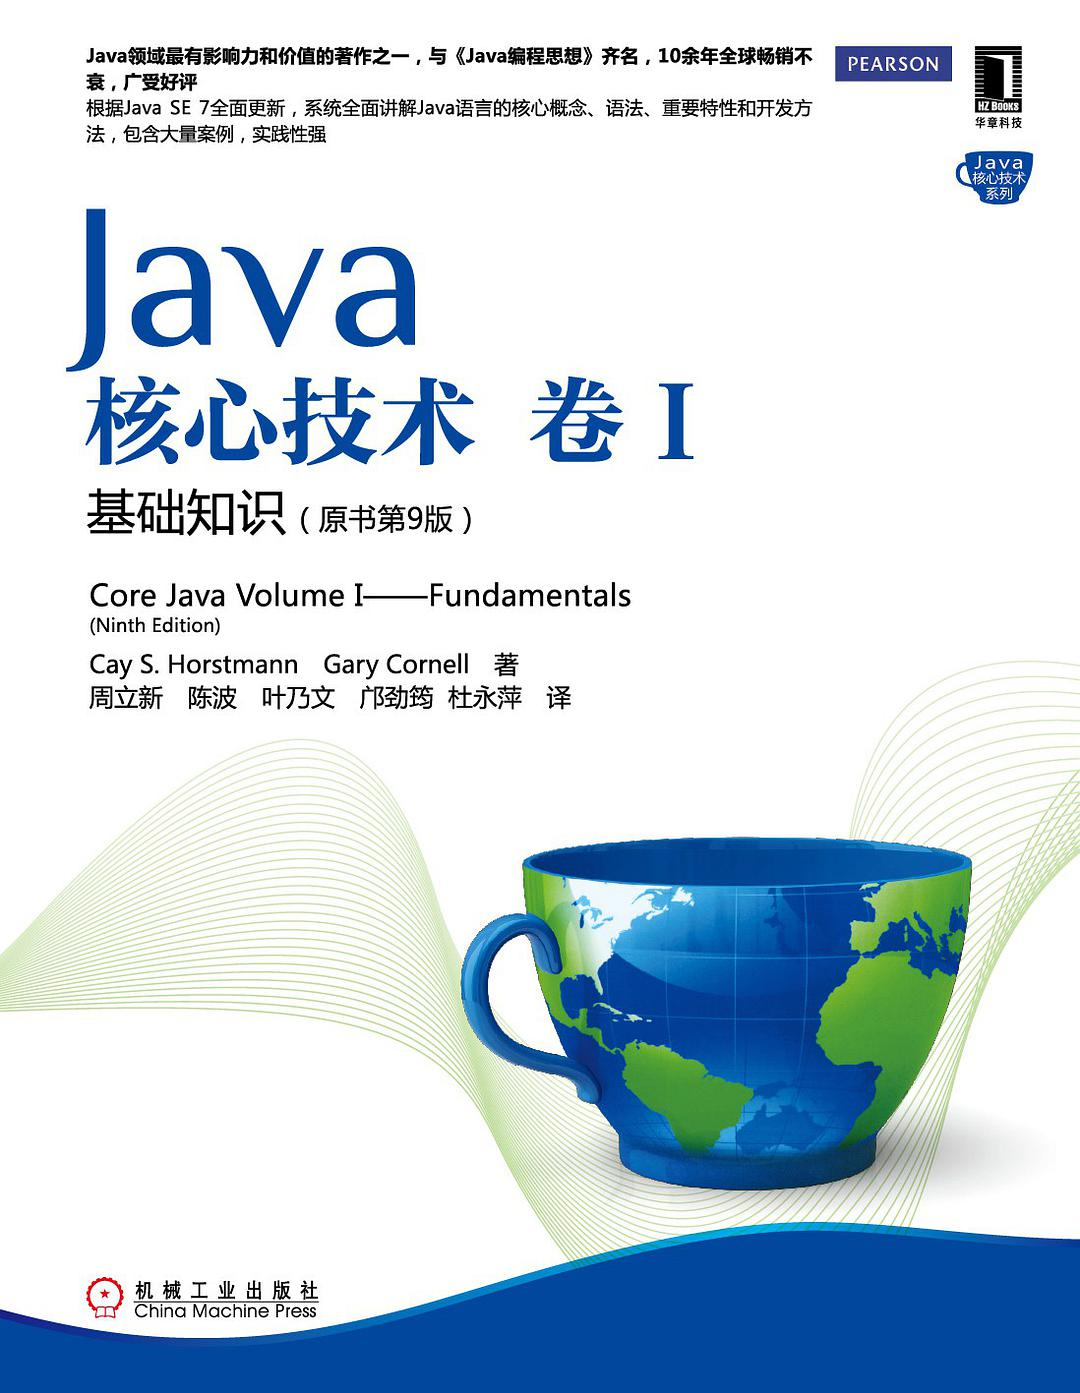  Book recommendations for getting started in Java!2